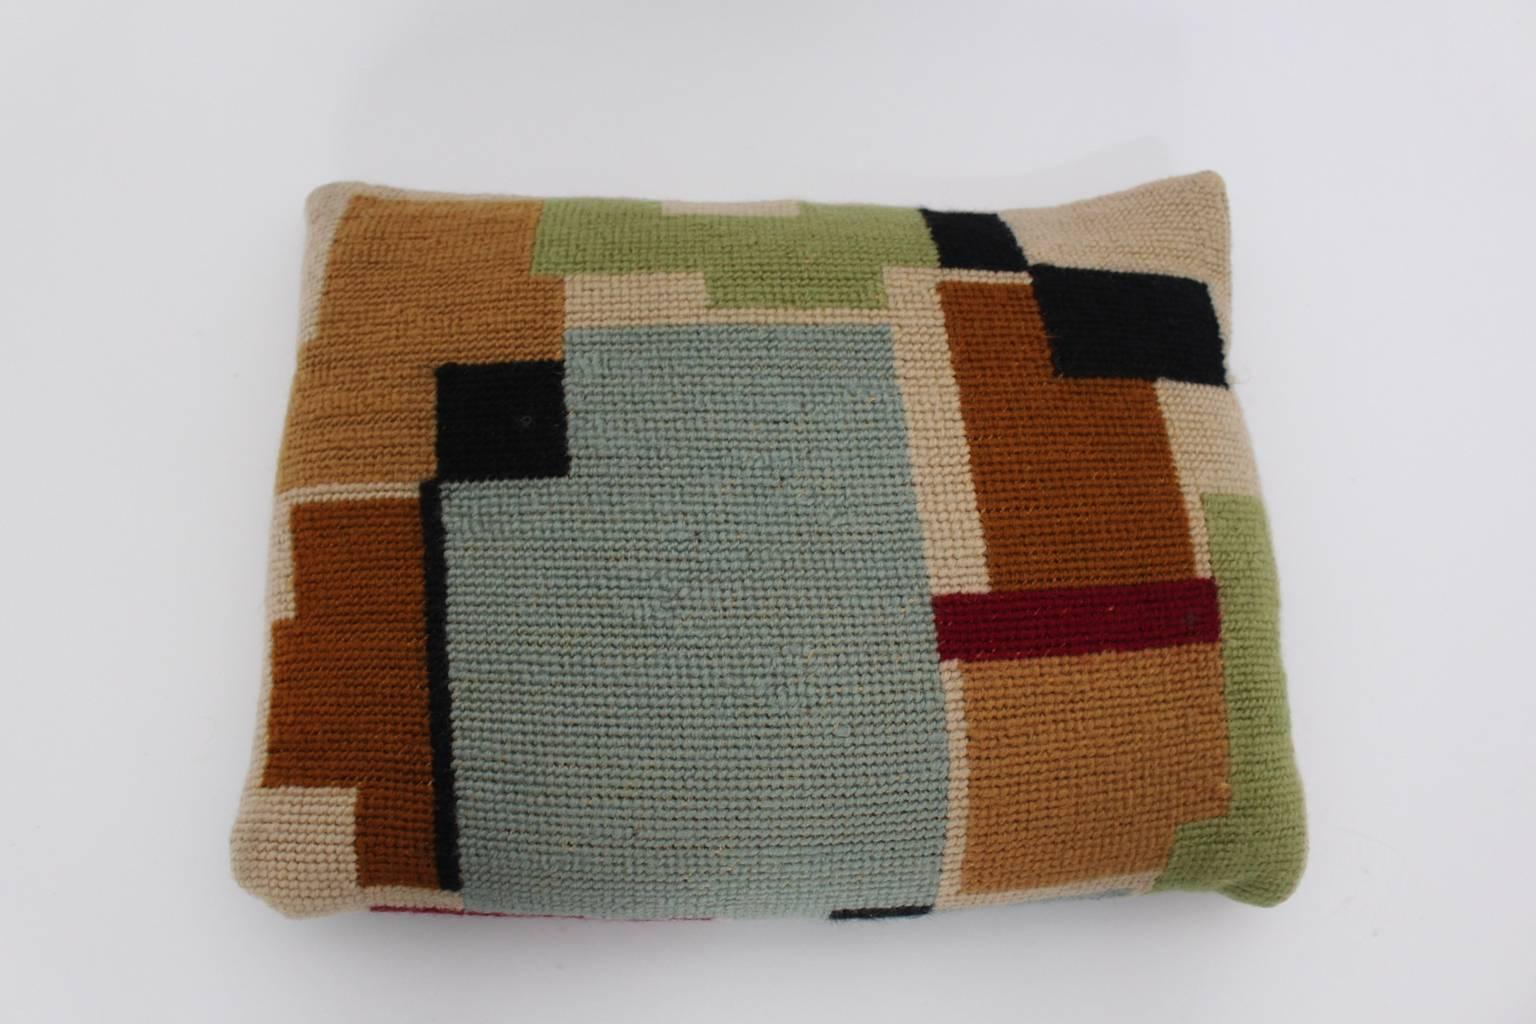 Bauhaus Style Hand Embroidery Wool Pillow with Geometric Design, 1920s In Good Condition For Sale In Vienna, AT